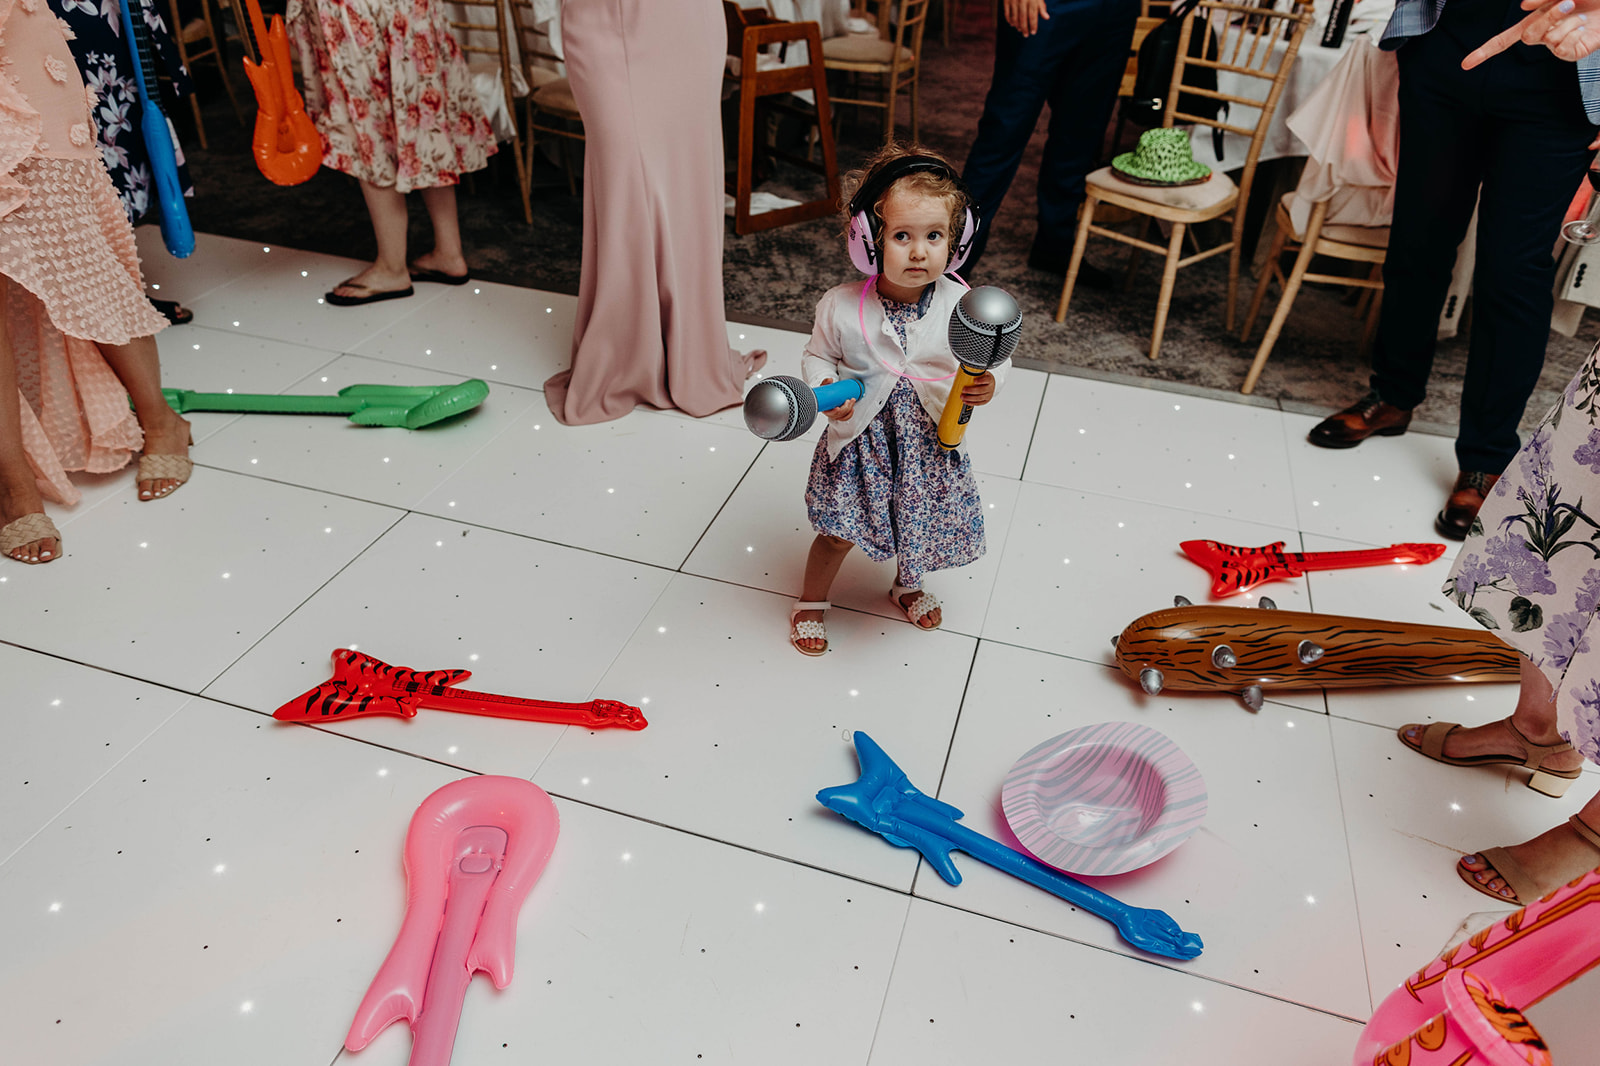 Documentary wedding photography captures a young girl with a toy microphone, standing amidst inflatable guitars 